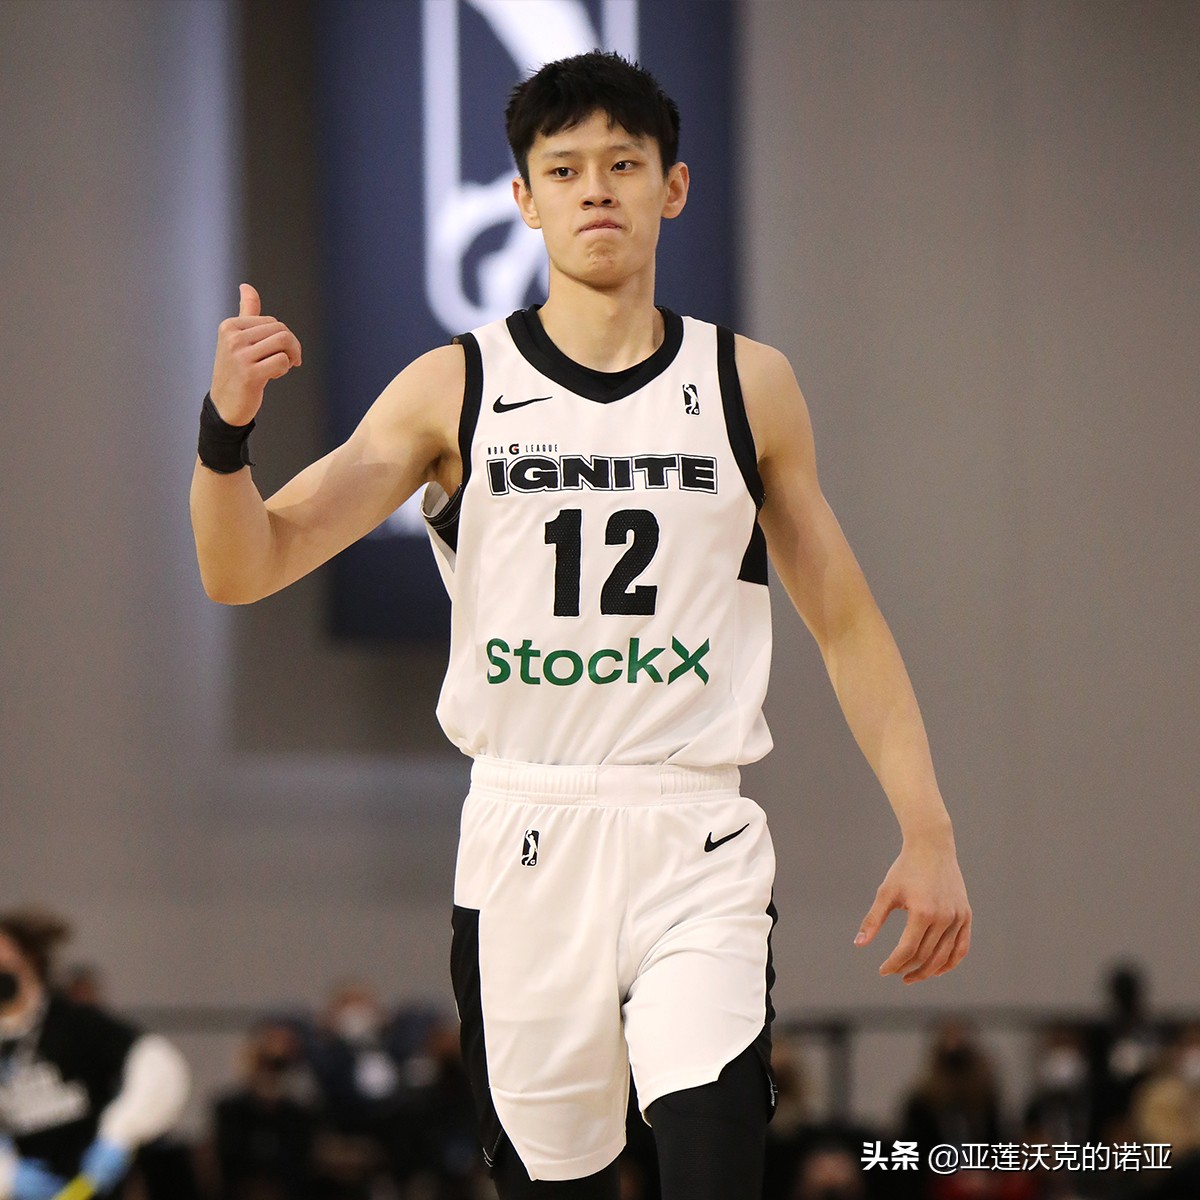 Chinese teenager Zeng Fanbo rated Four-Star high-school player by